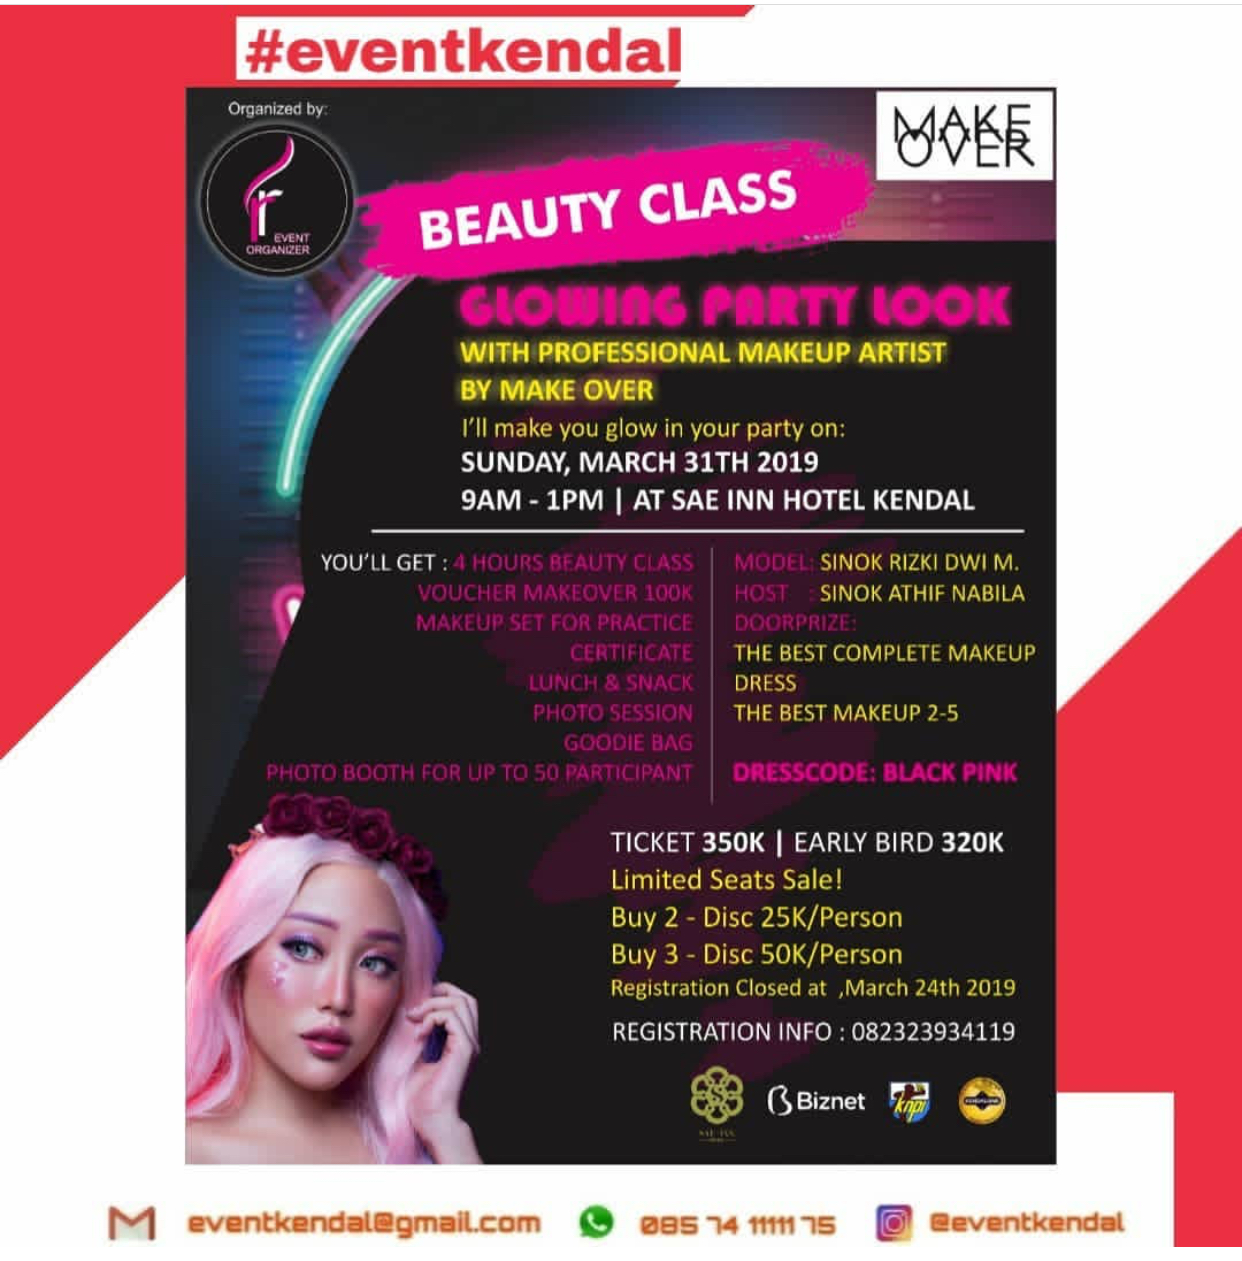 EVENT KENDAL - BEAUTY CLASS GLOWING PART LOOK 